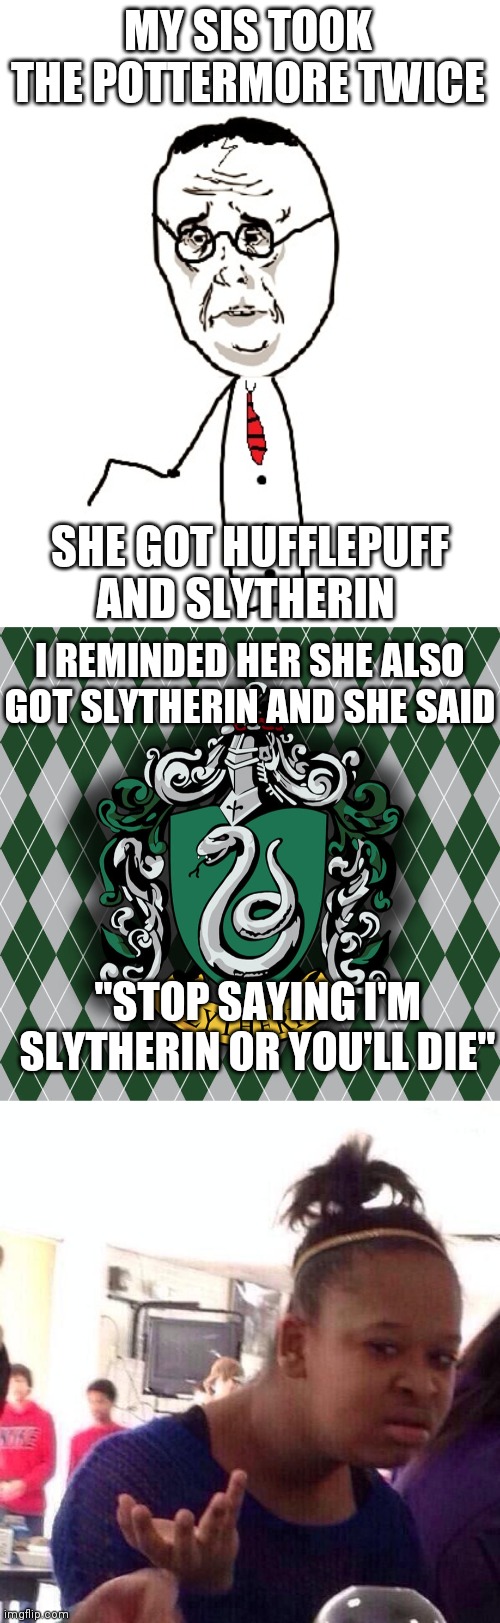 ????? | MY SIS TOOK THE POTTERMORE TWICE; SHE GOT HUFFLEPUFF AND SLYTHERIN; I REMINDED HER SHE ALSO GOT SLYTHERIN AND SHE SAID; "STOP SAYING I'M SLYTHERIN OR YOU'LL DIE" | image tagged in memes,harry potter ok,slytherin,black girl wat,harry potter,hufflepuff | made w/ Imgflip meme maker